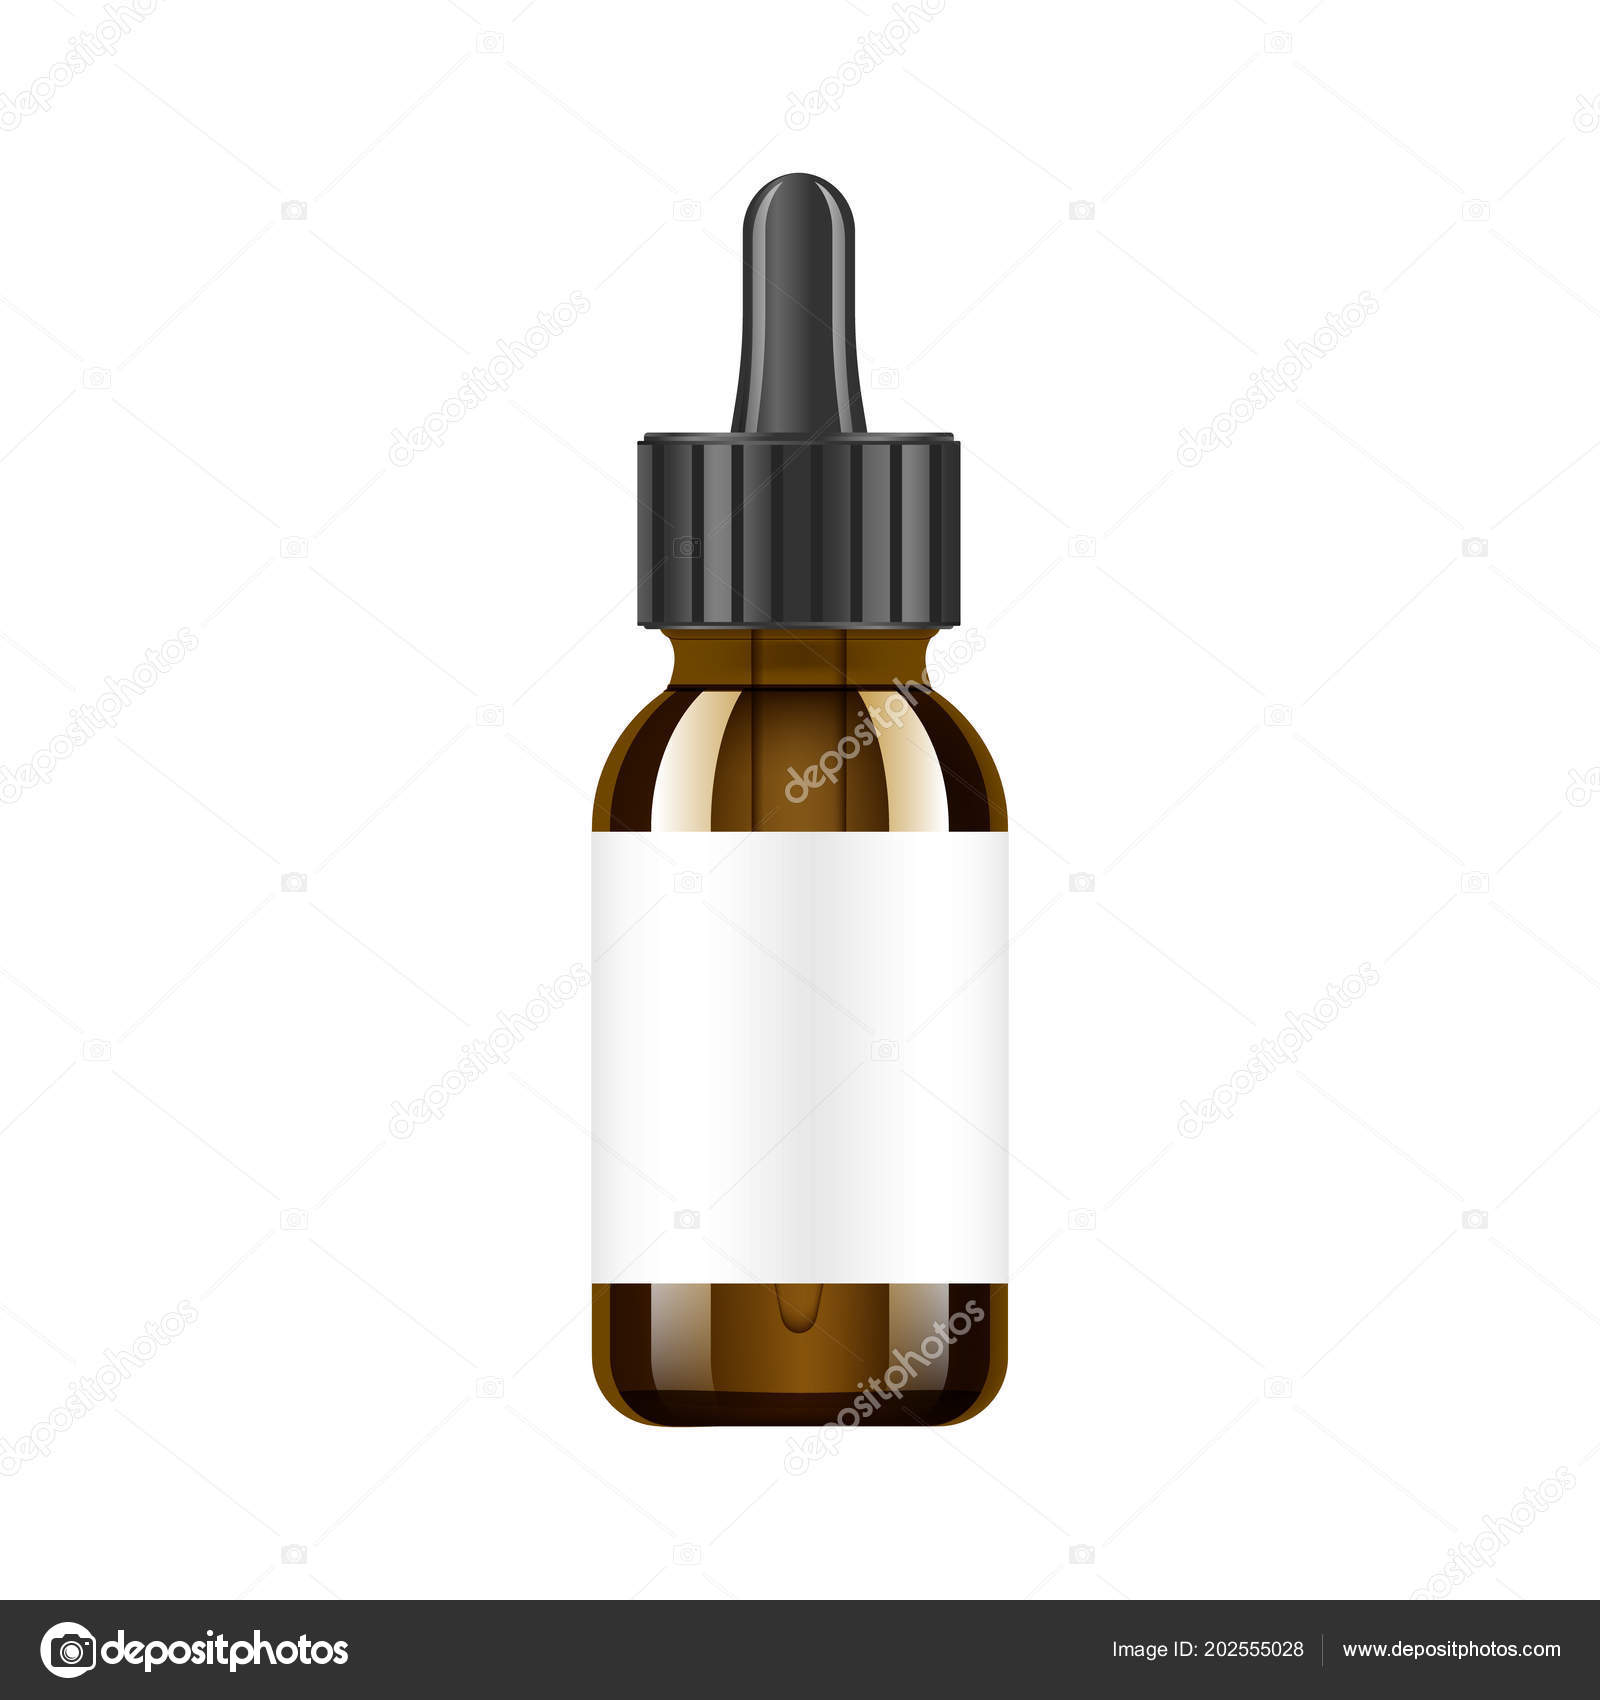 Download Realistic Essential Oil Brown Bottle Mock Up Bottle Cosmetic Vial Flask Flacon Medical Bank Cosmetic Dropper Bottle With Design Label Vector Illustration Vector Image By C Vandycandy Vector Stock 202555028